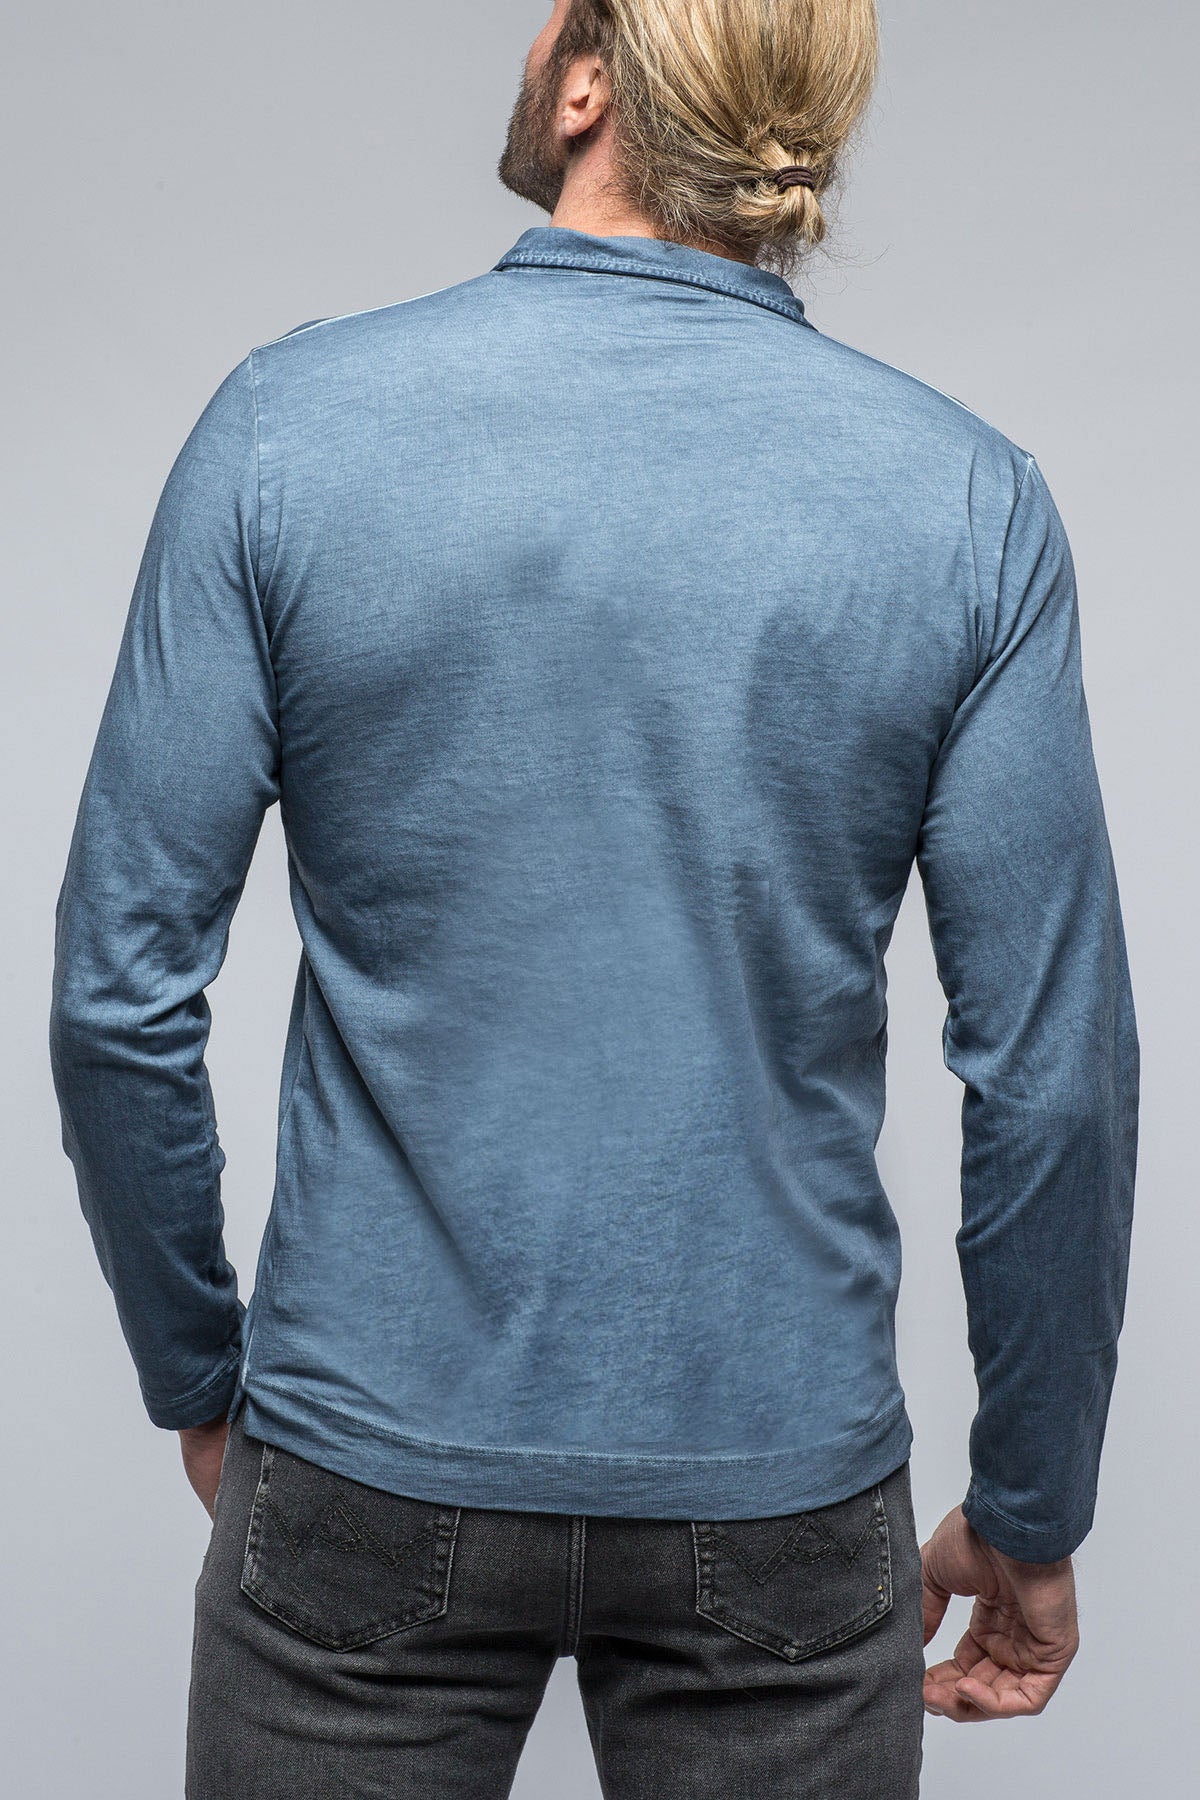 Torrance Long Sleeve Polo in Midnight Blue | Mens - Shirts - Polos | Gimo's Cotton